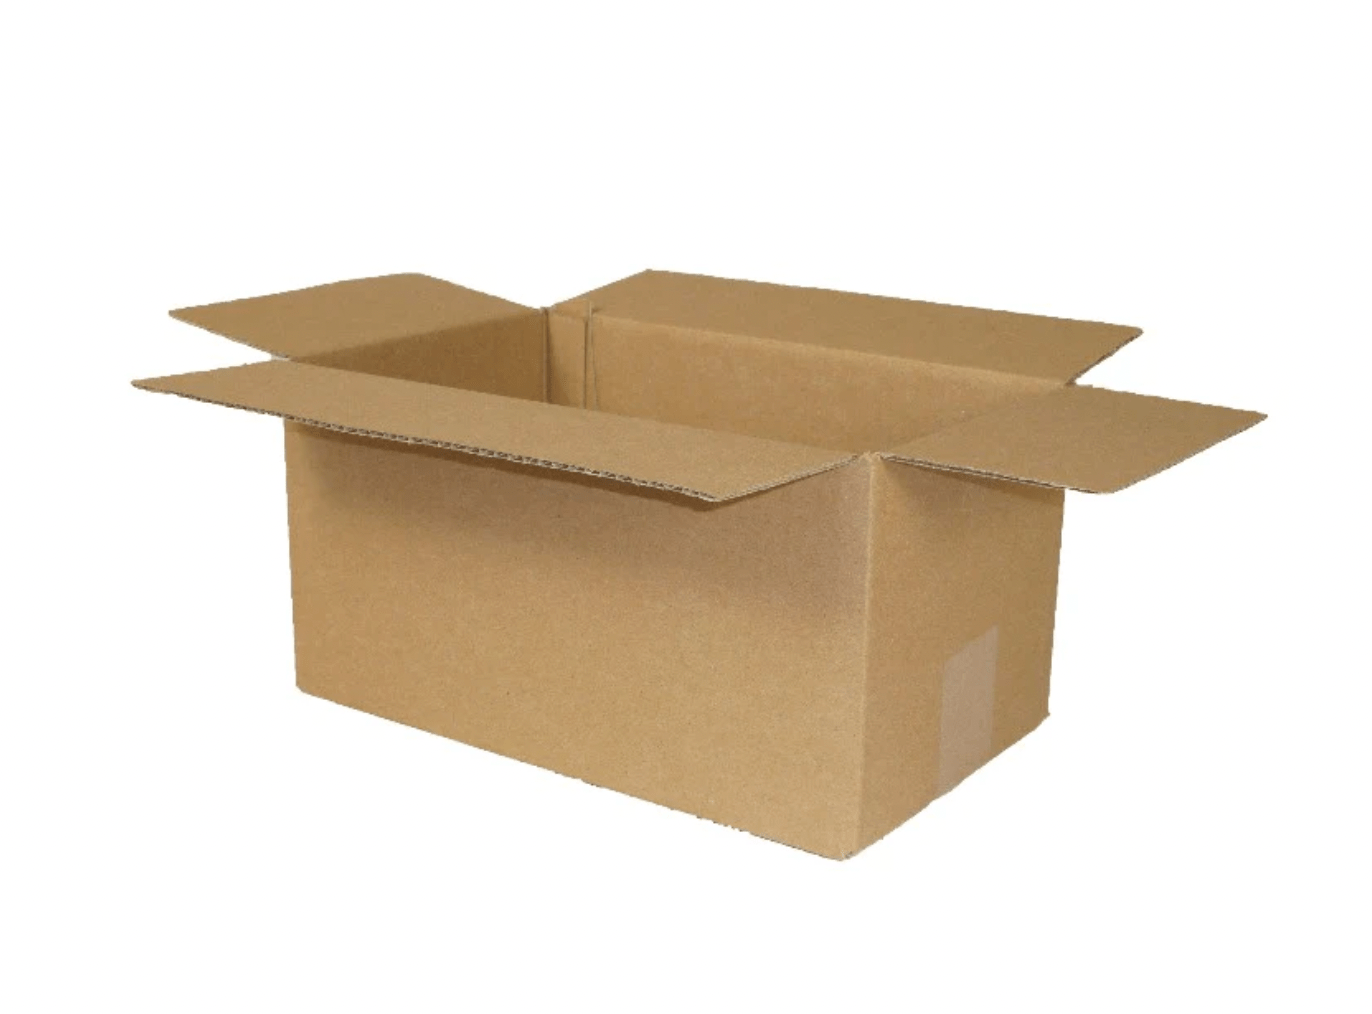 600 x New Plain Strong Single Wall Box - 288 x 174 x 145mm.                         £265.00 - High Quality Recycled Once-Used Cardboard Boxes online - Black Country Boxes